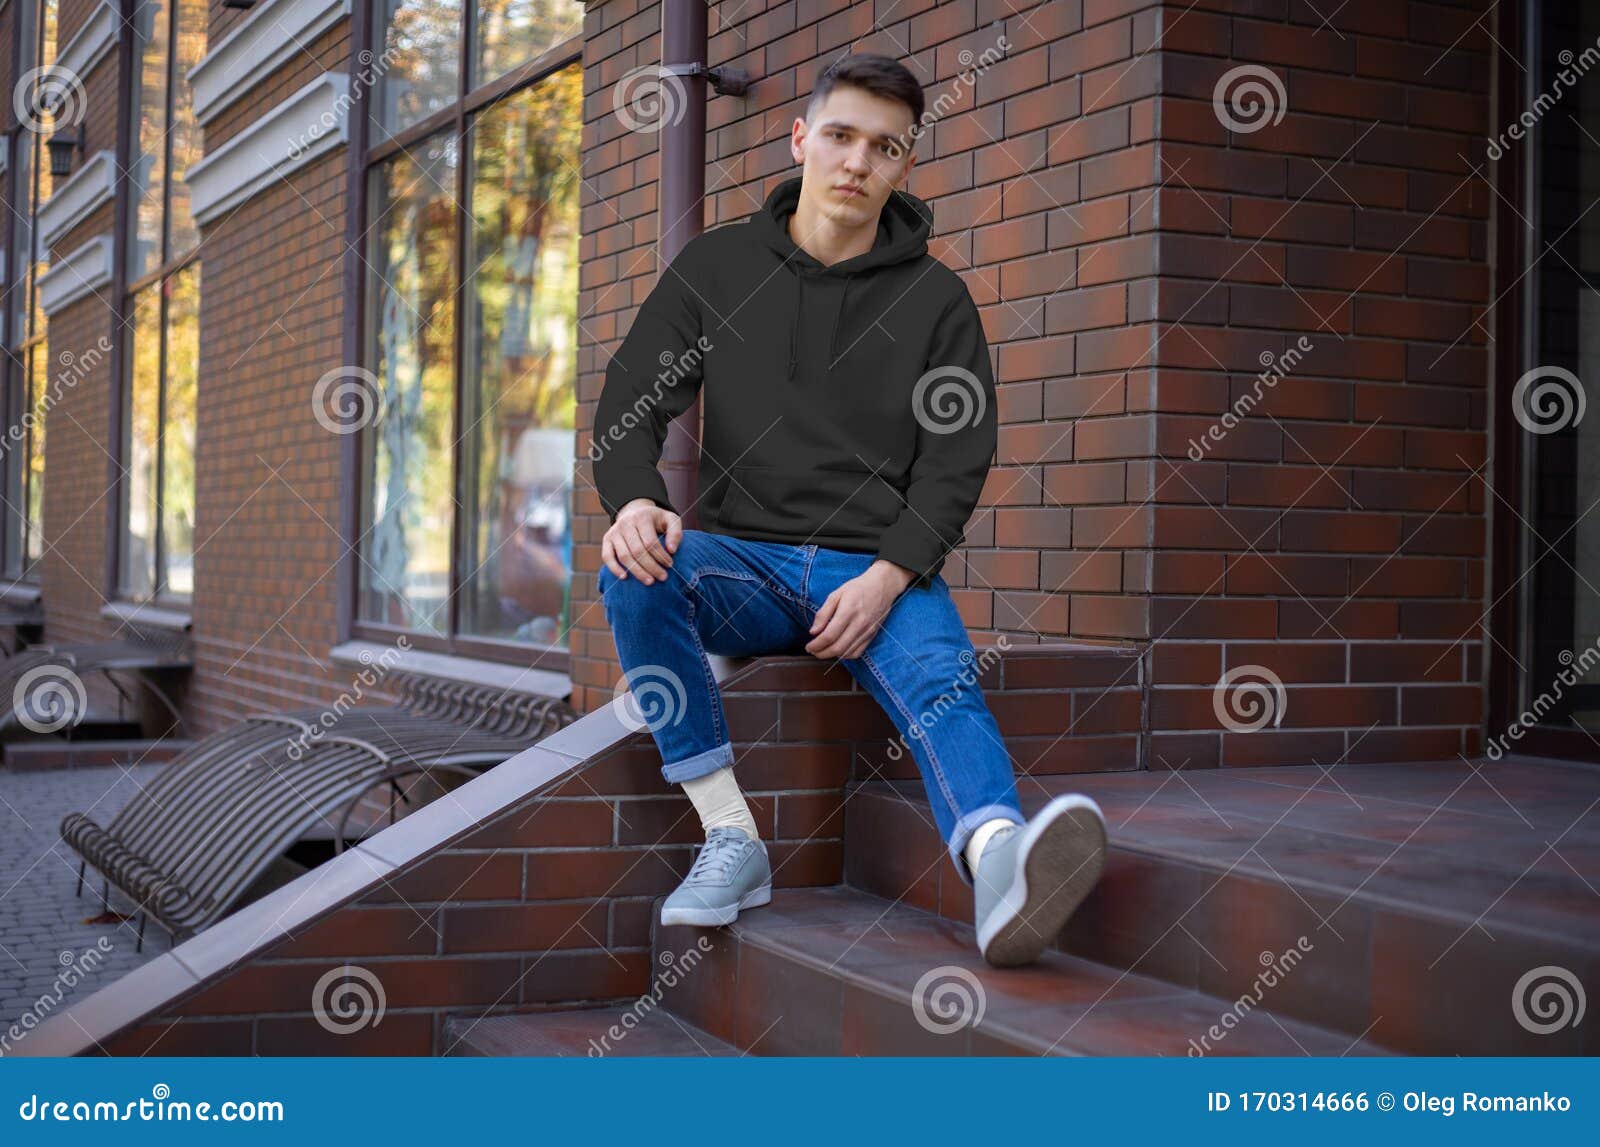 Download Mockup Of A Black Hoodie On A Young Guy, Front View ...